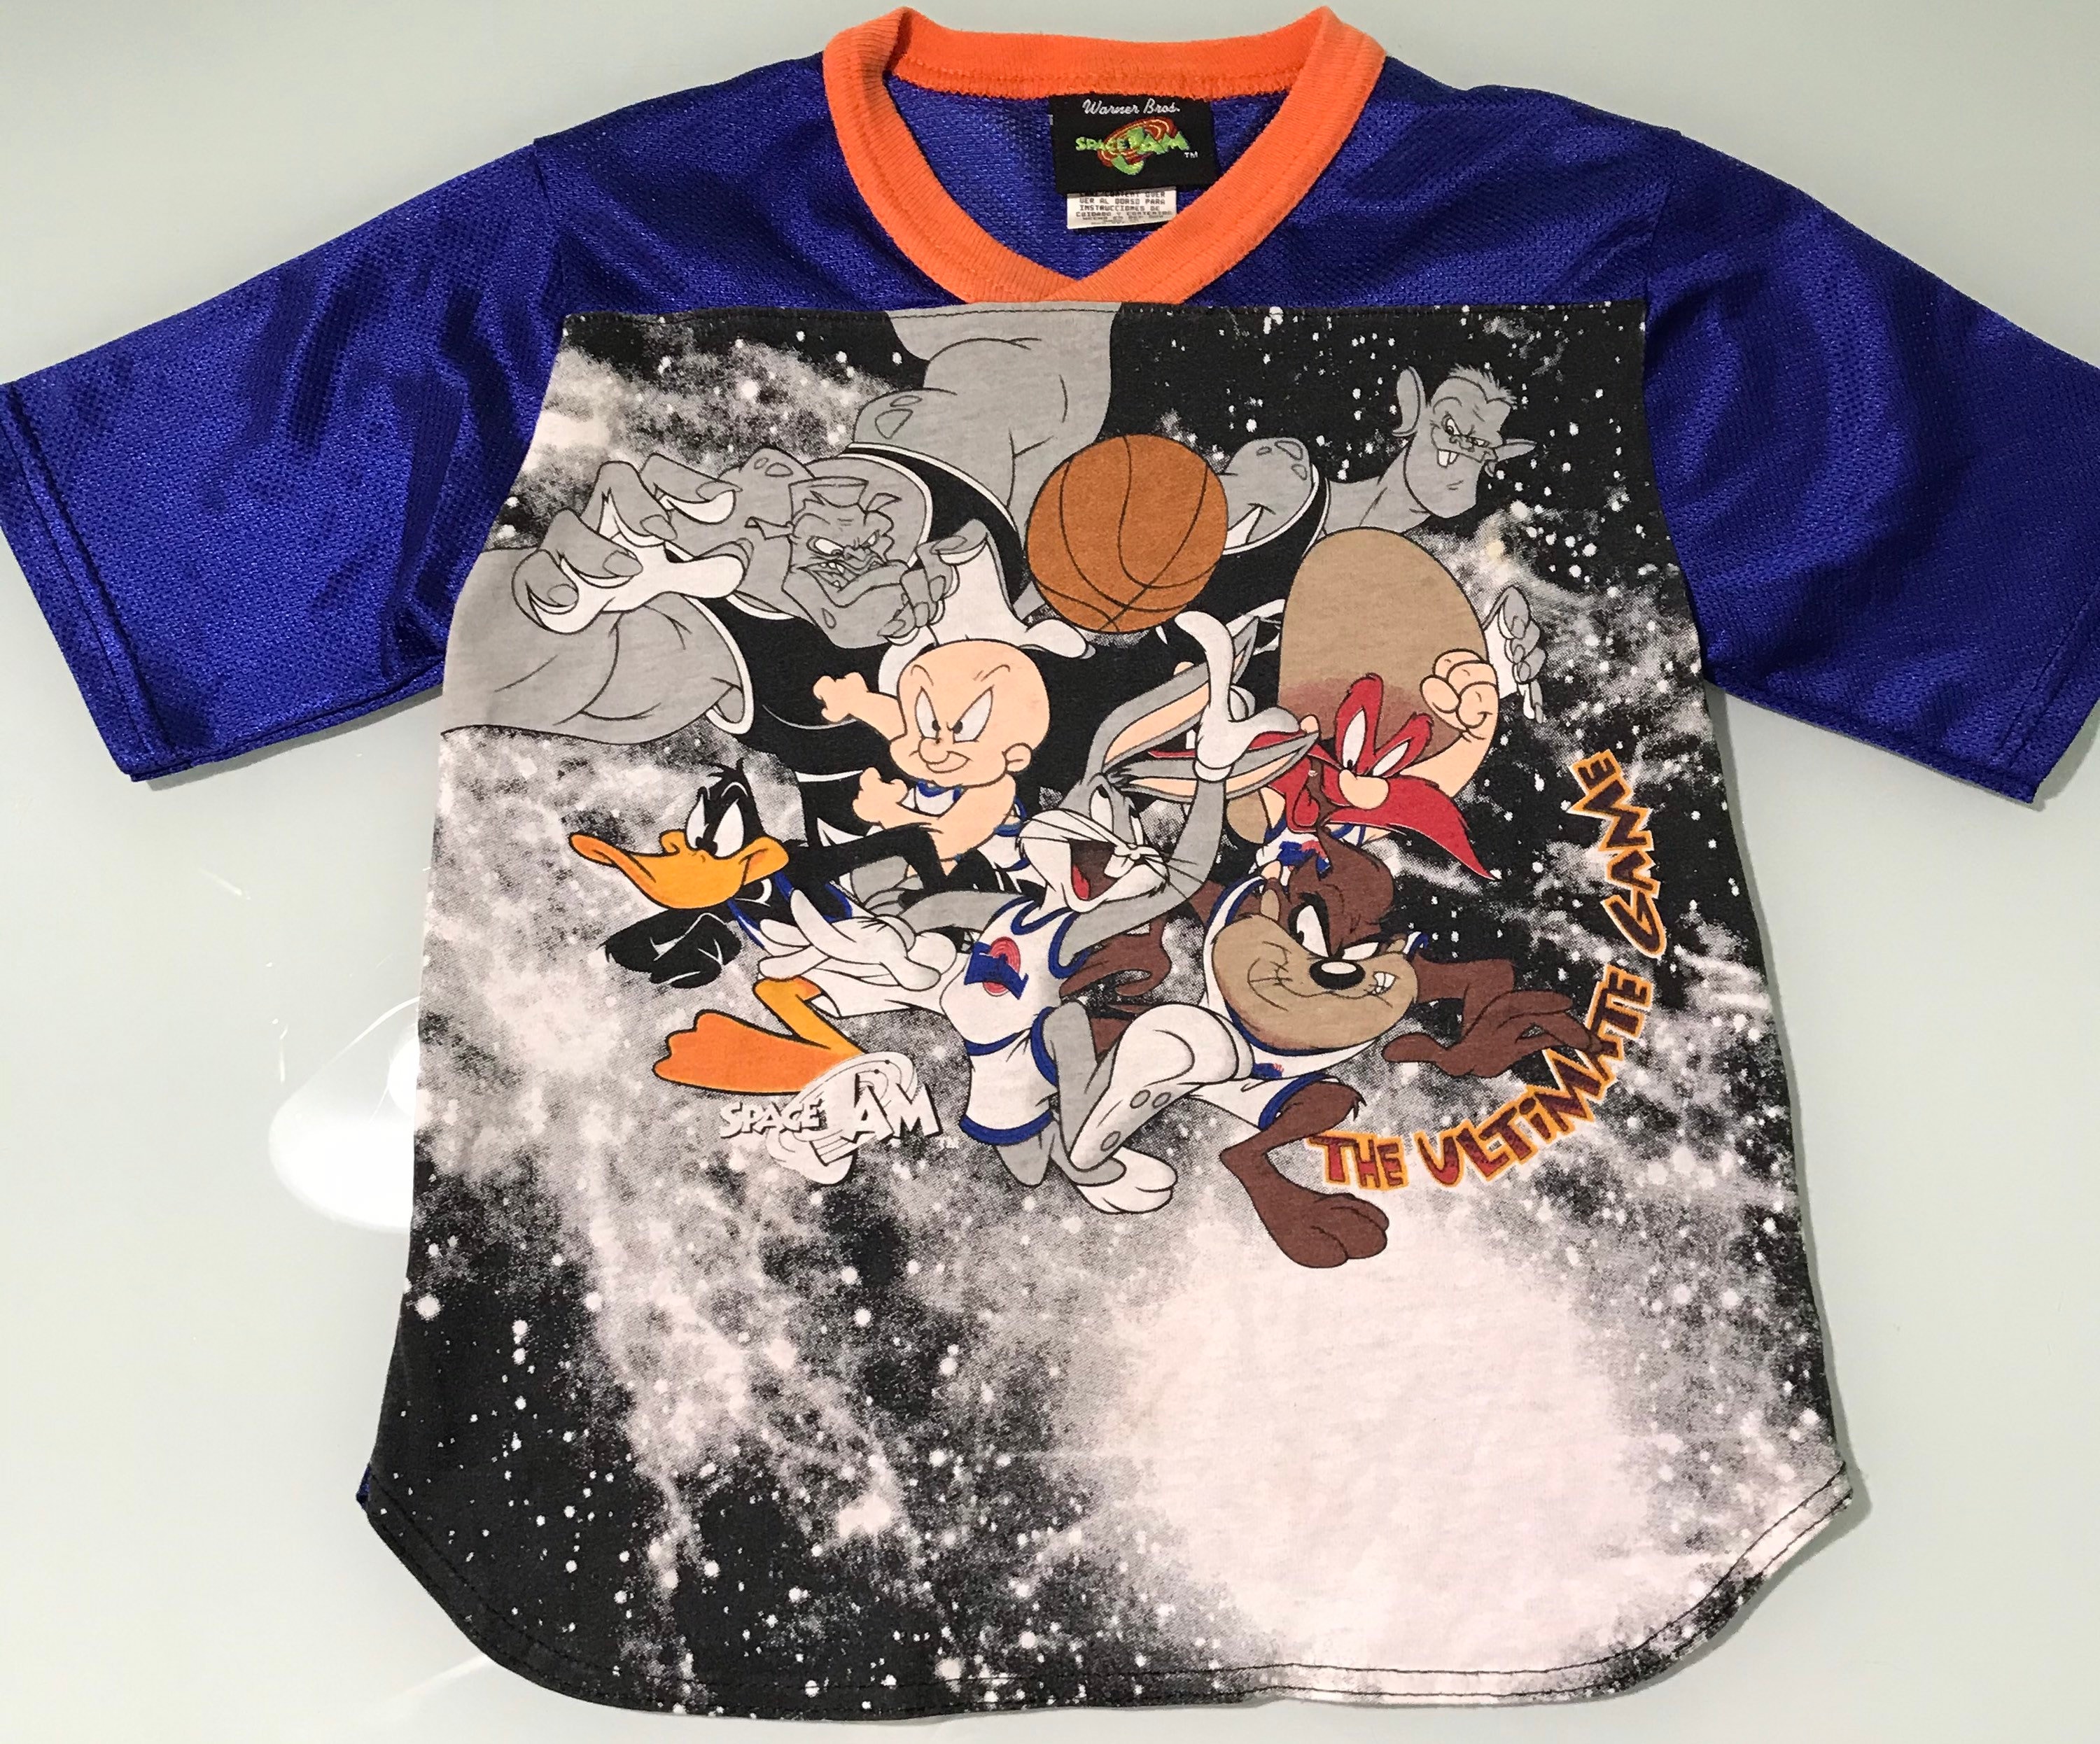 Vintage Michael Jordan Space Jam Tune Squad Jersey – For All To Envy